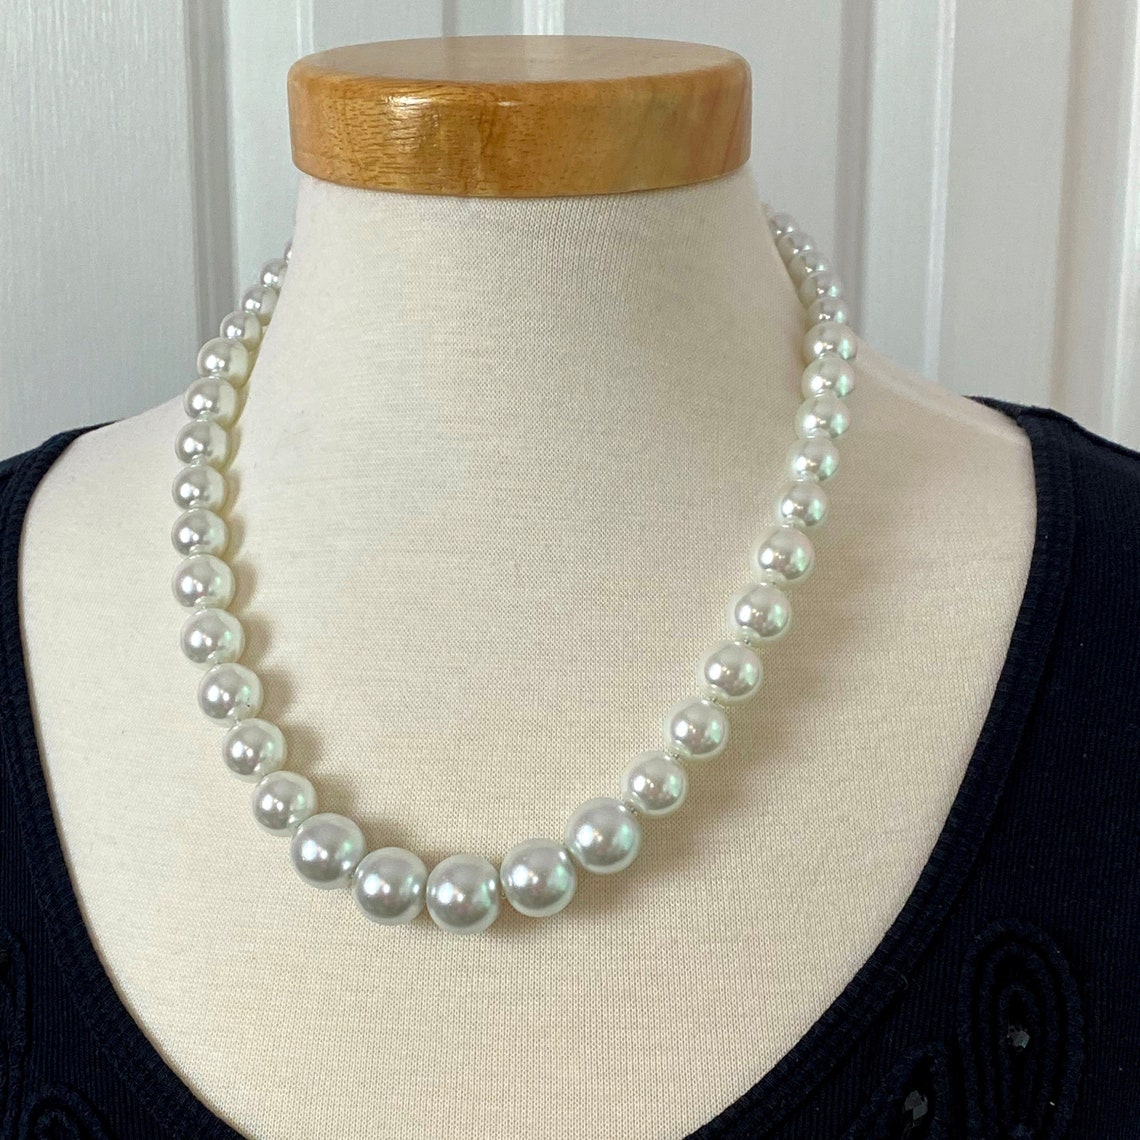 Chunky Graduated White Pearl Necklace Small to Large Pearl - Etsy